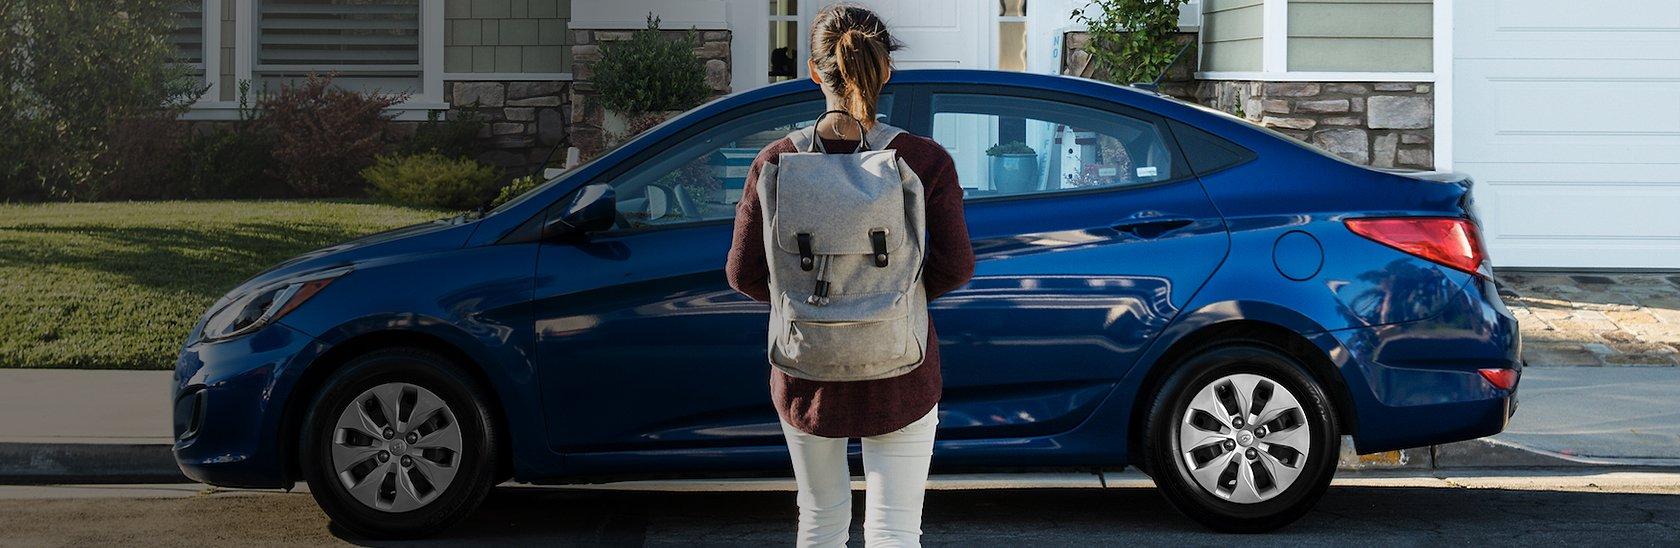 College Girl standing in front of blue hyundai